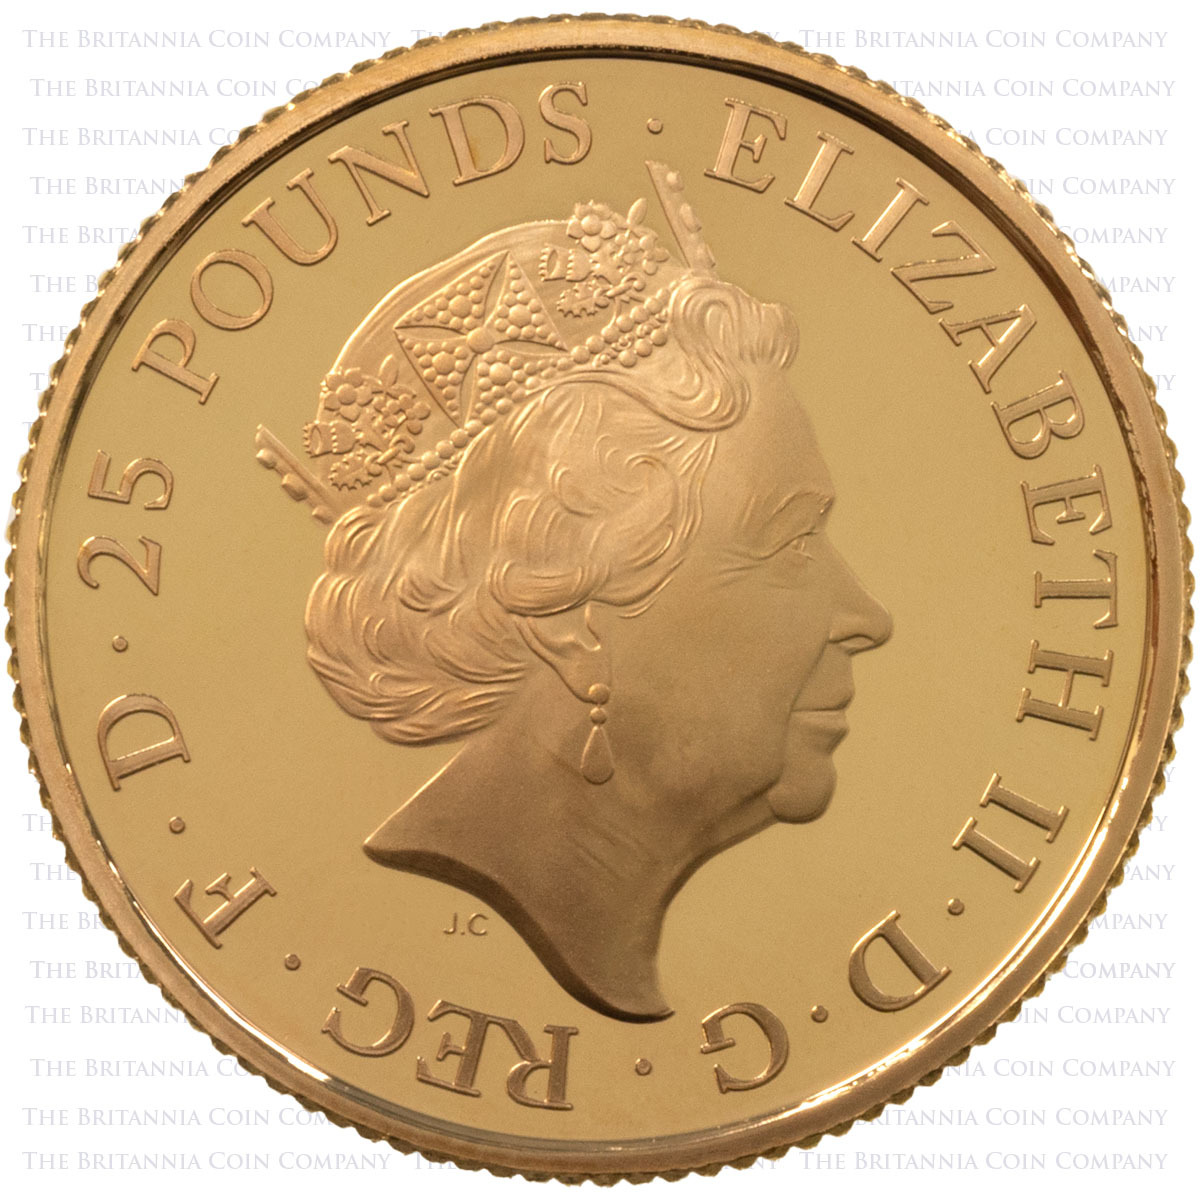 UK19QFQO 2019 Queen's Beasts Falcon Of The Plantagenets Quarter Ounce Gold Proof Coin Obverse